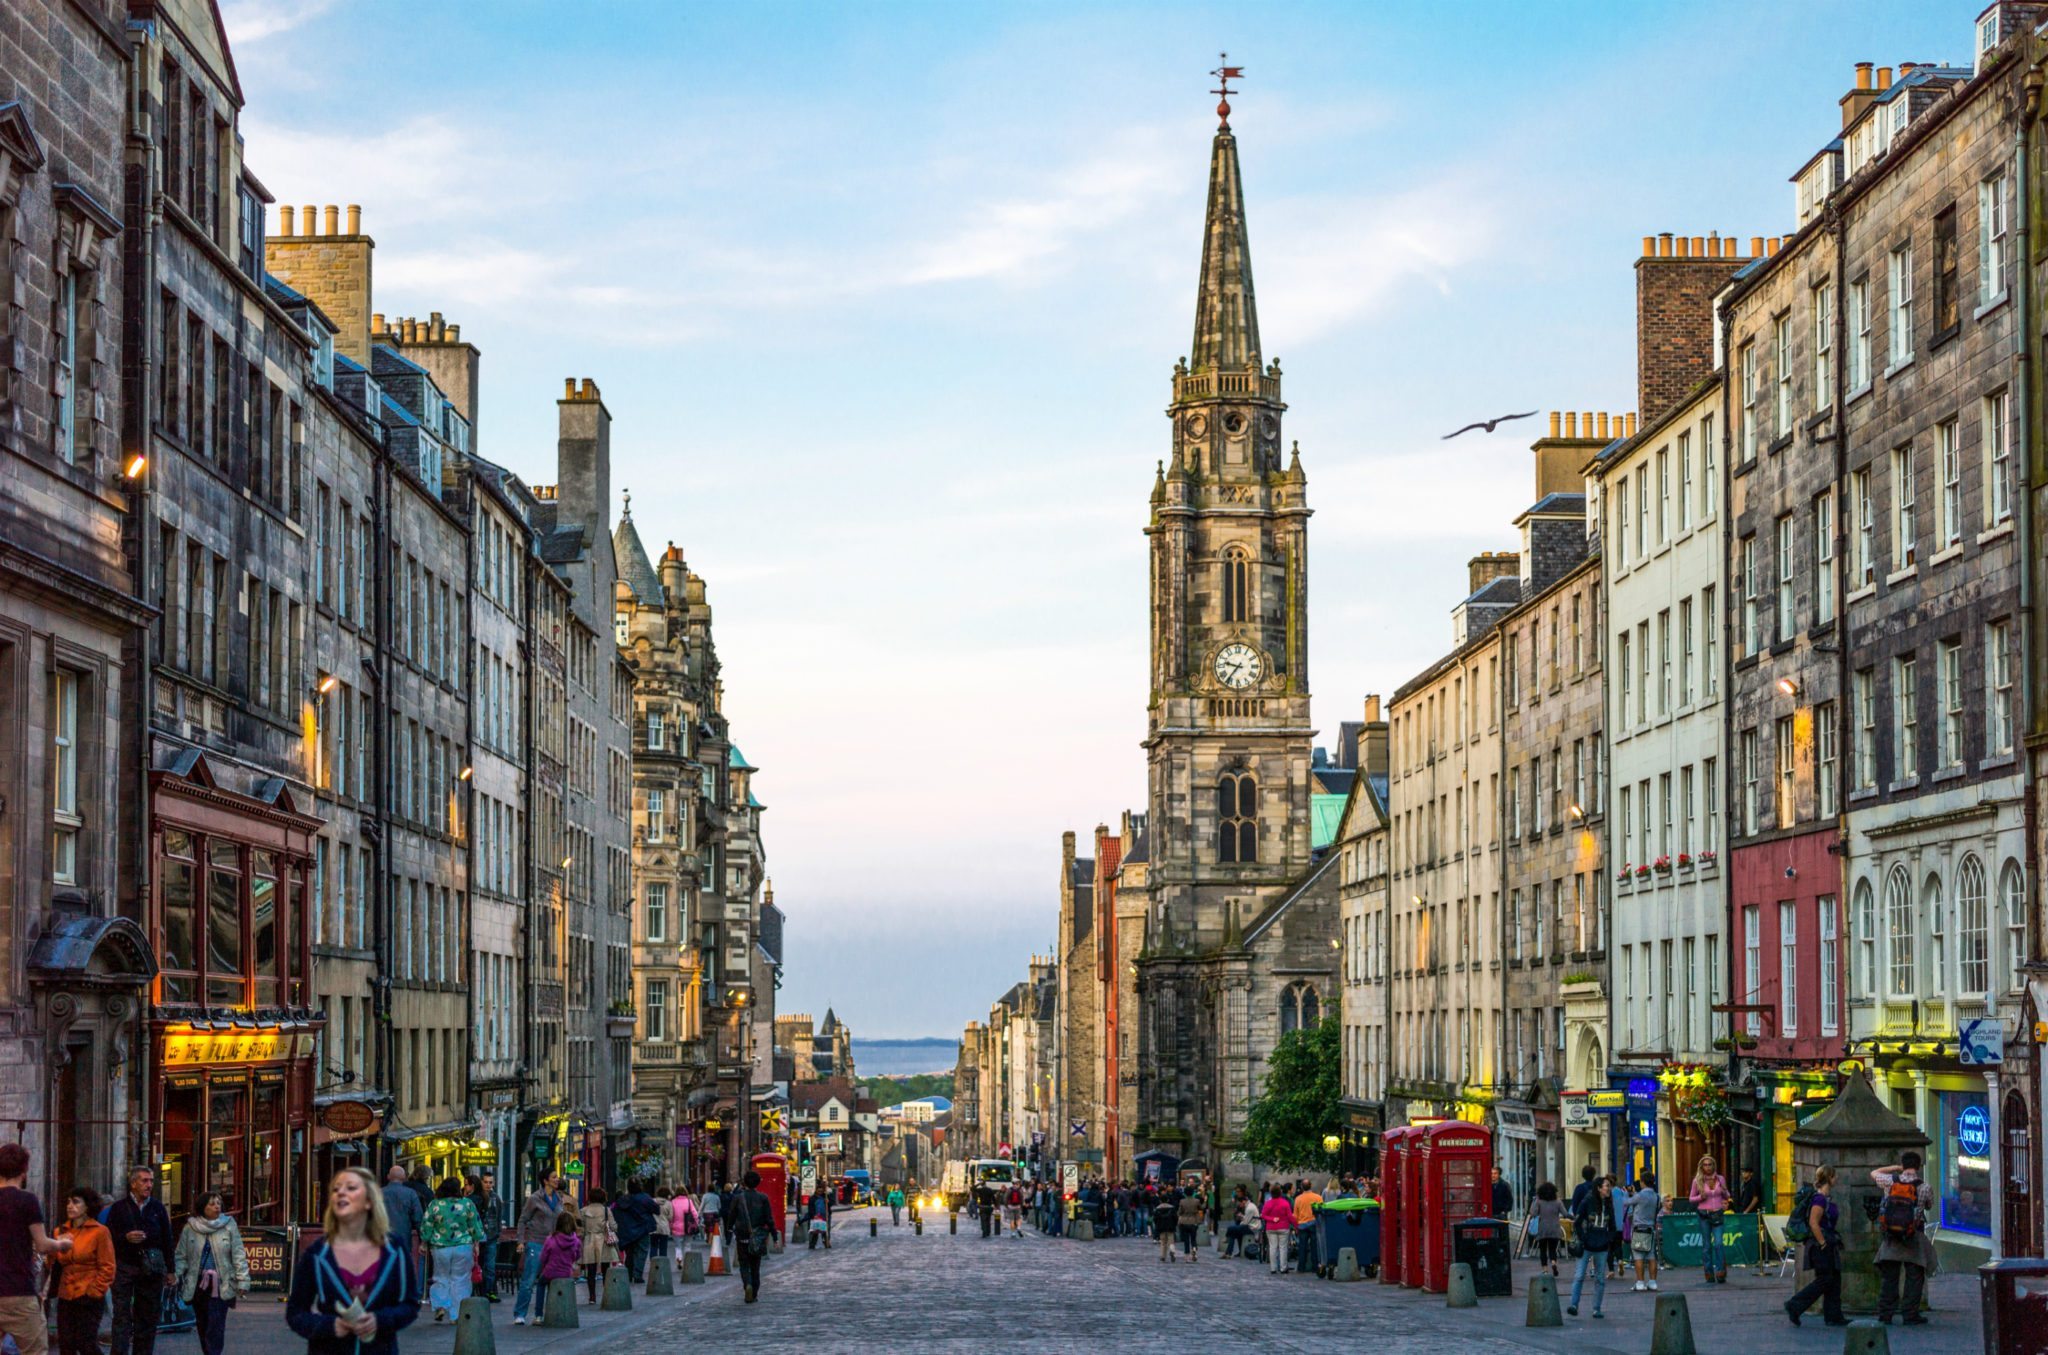 The busy street of The Royal Mile.